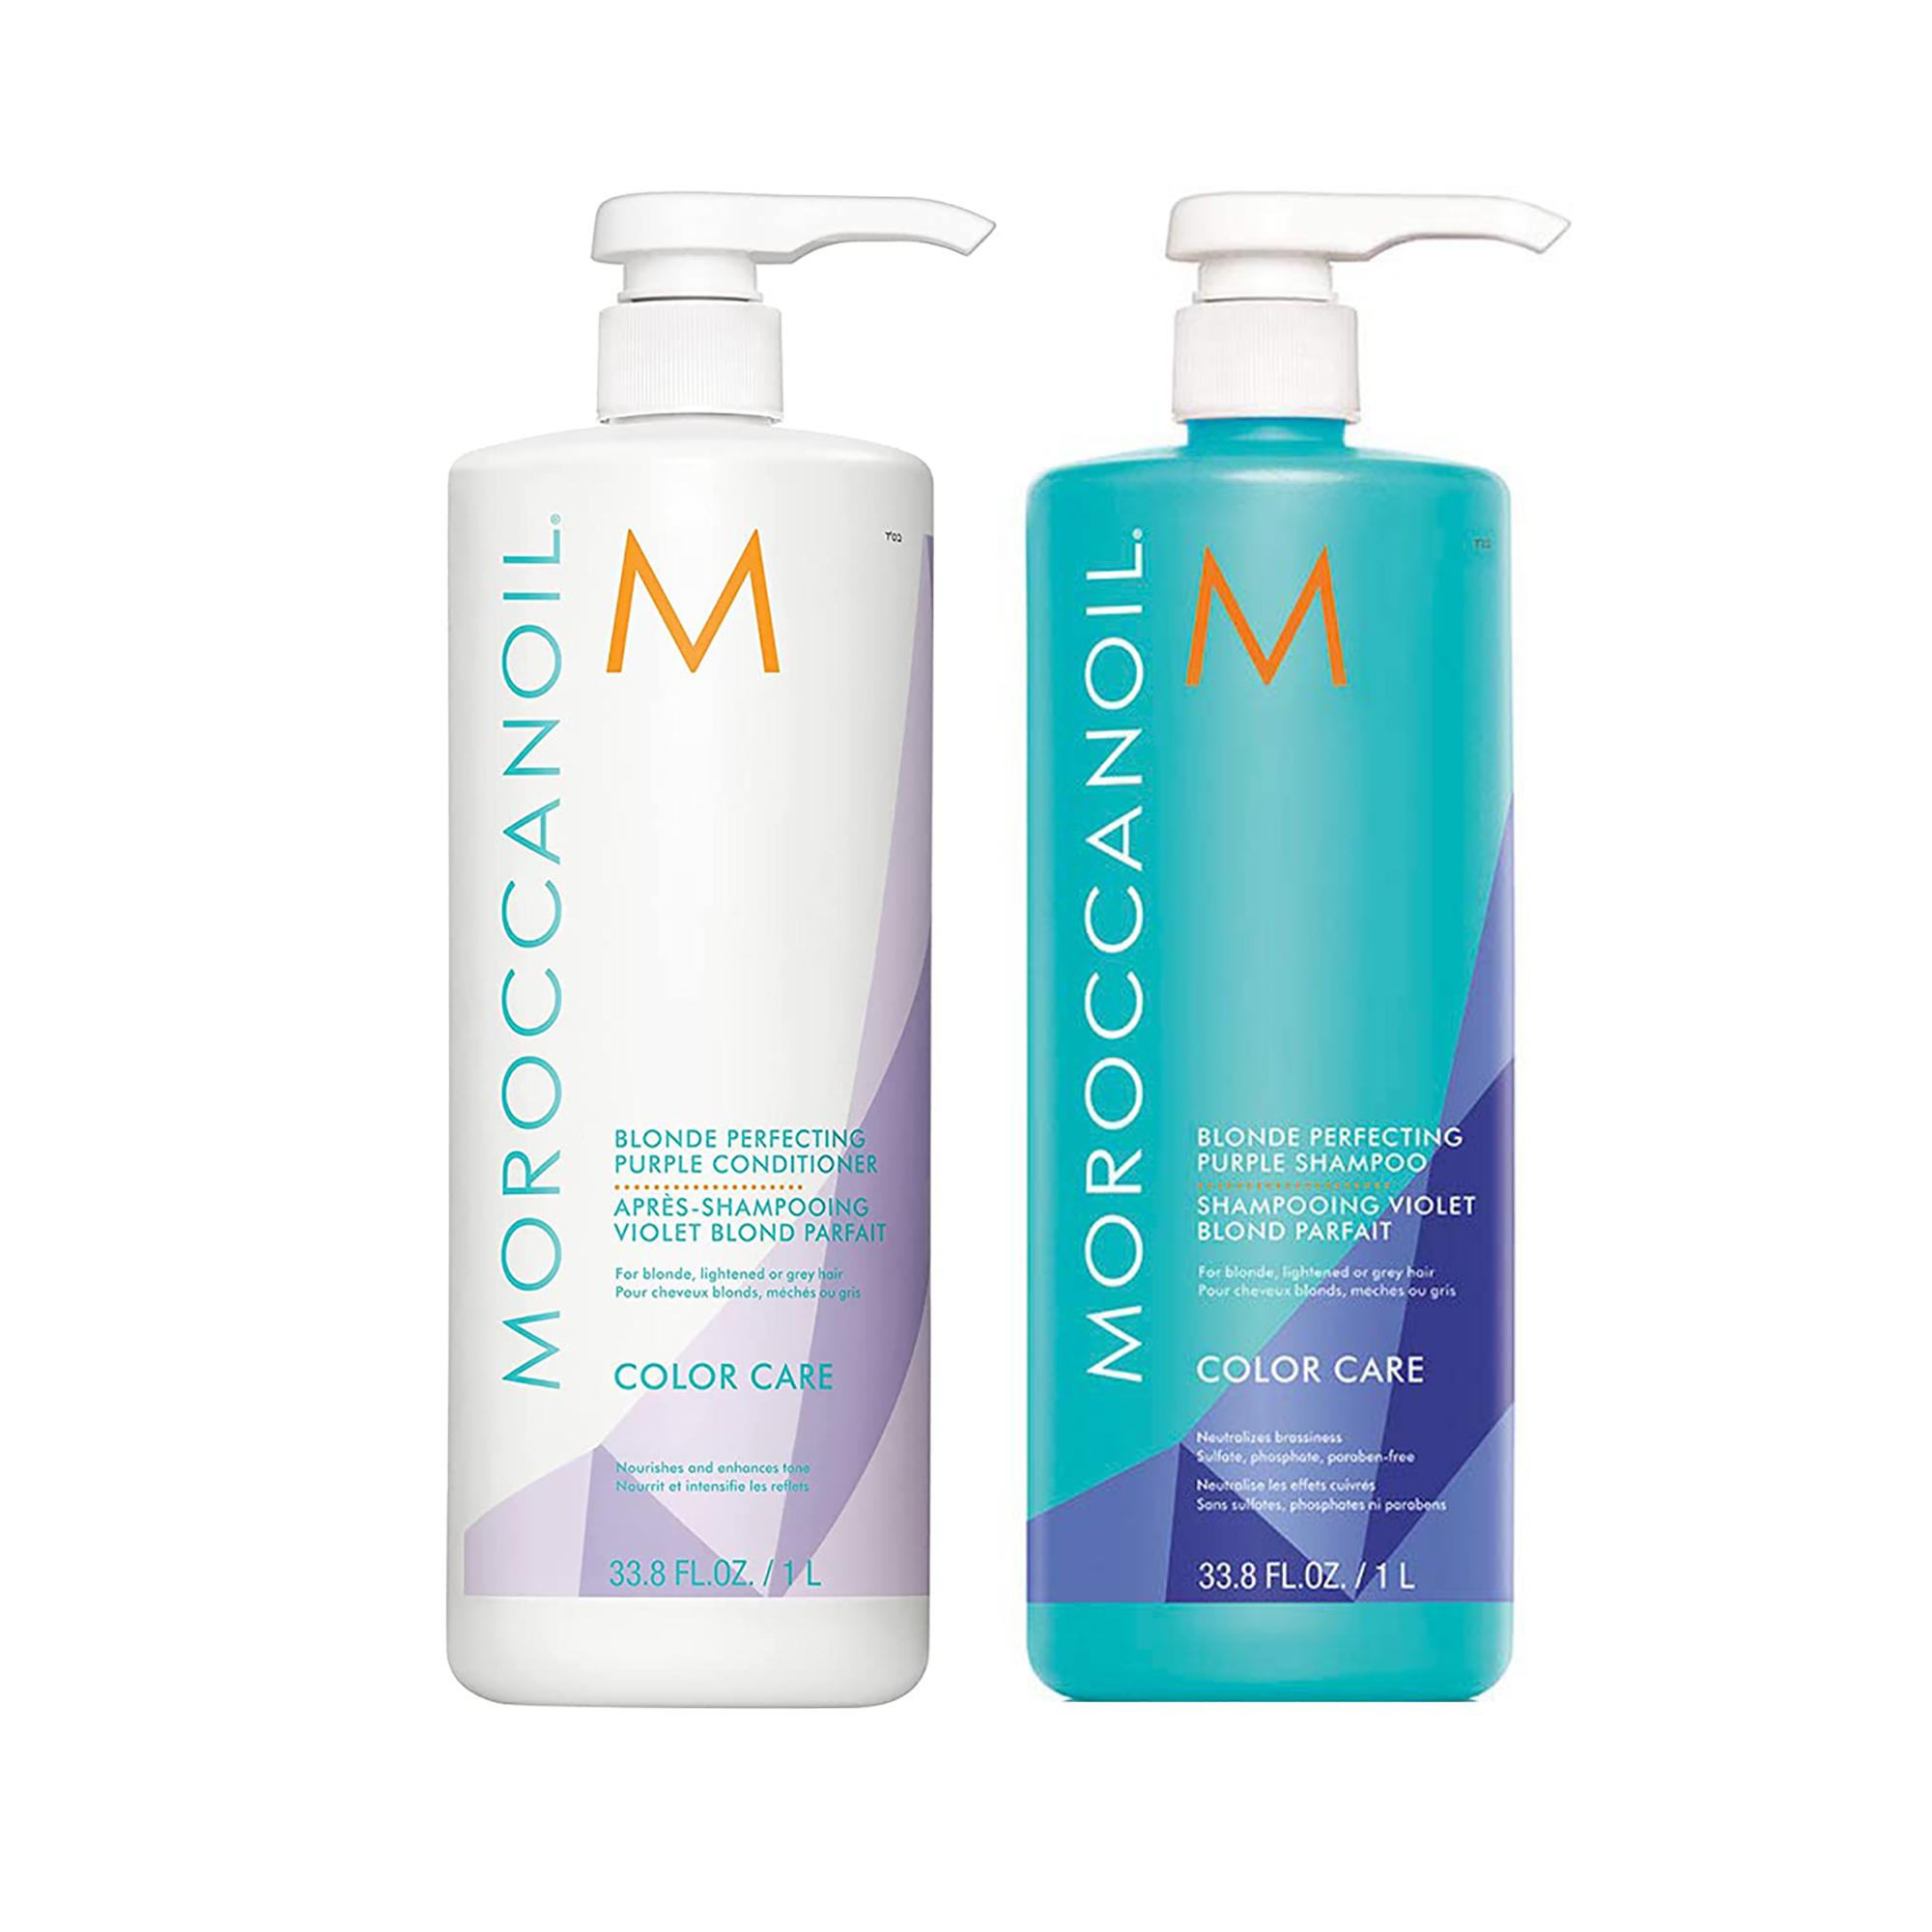 MoroccanOil Blonde Perfecting Shampoo and Conditioner Liter Duo ($150 VALUE) / LITER